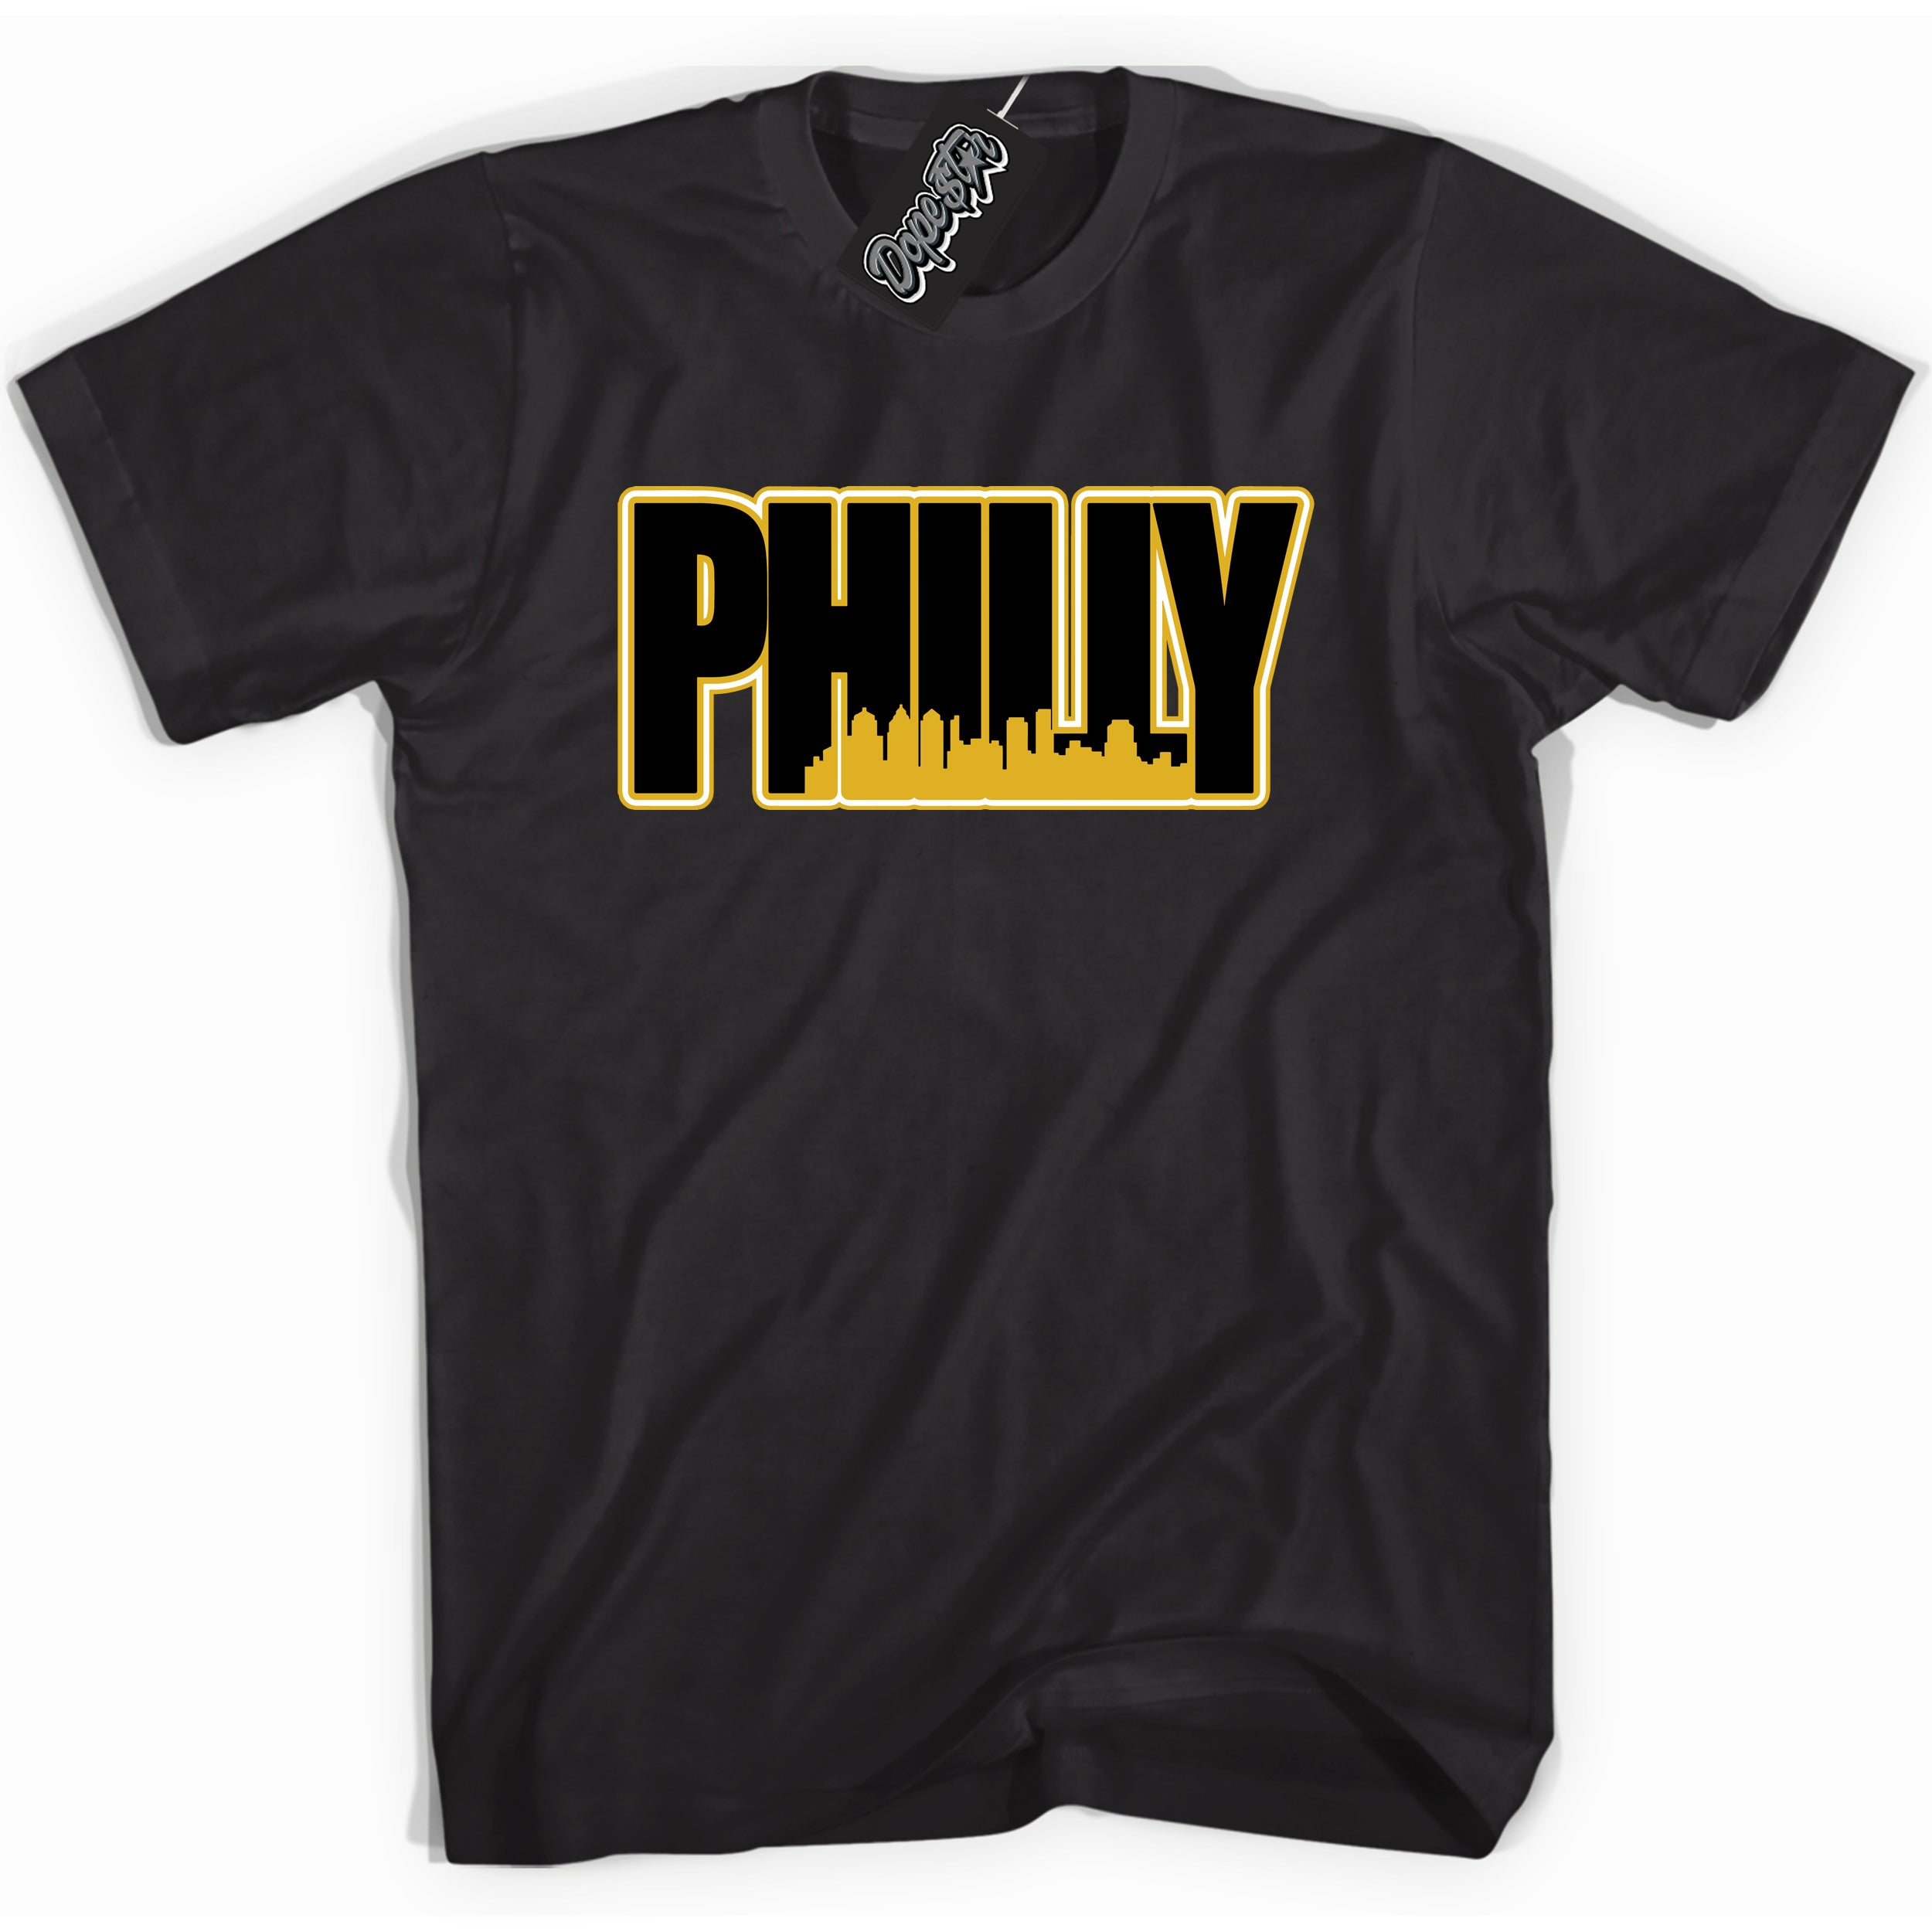 Cool Black Shirt with “ Philly” design that perfectly matches Yellow Ochre 6s Sneakers.